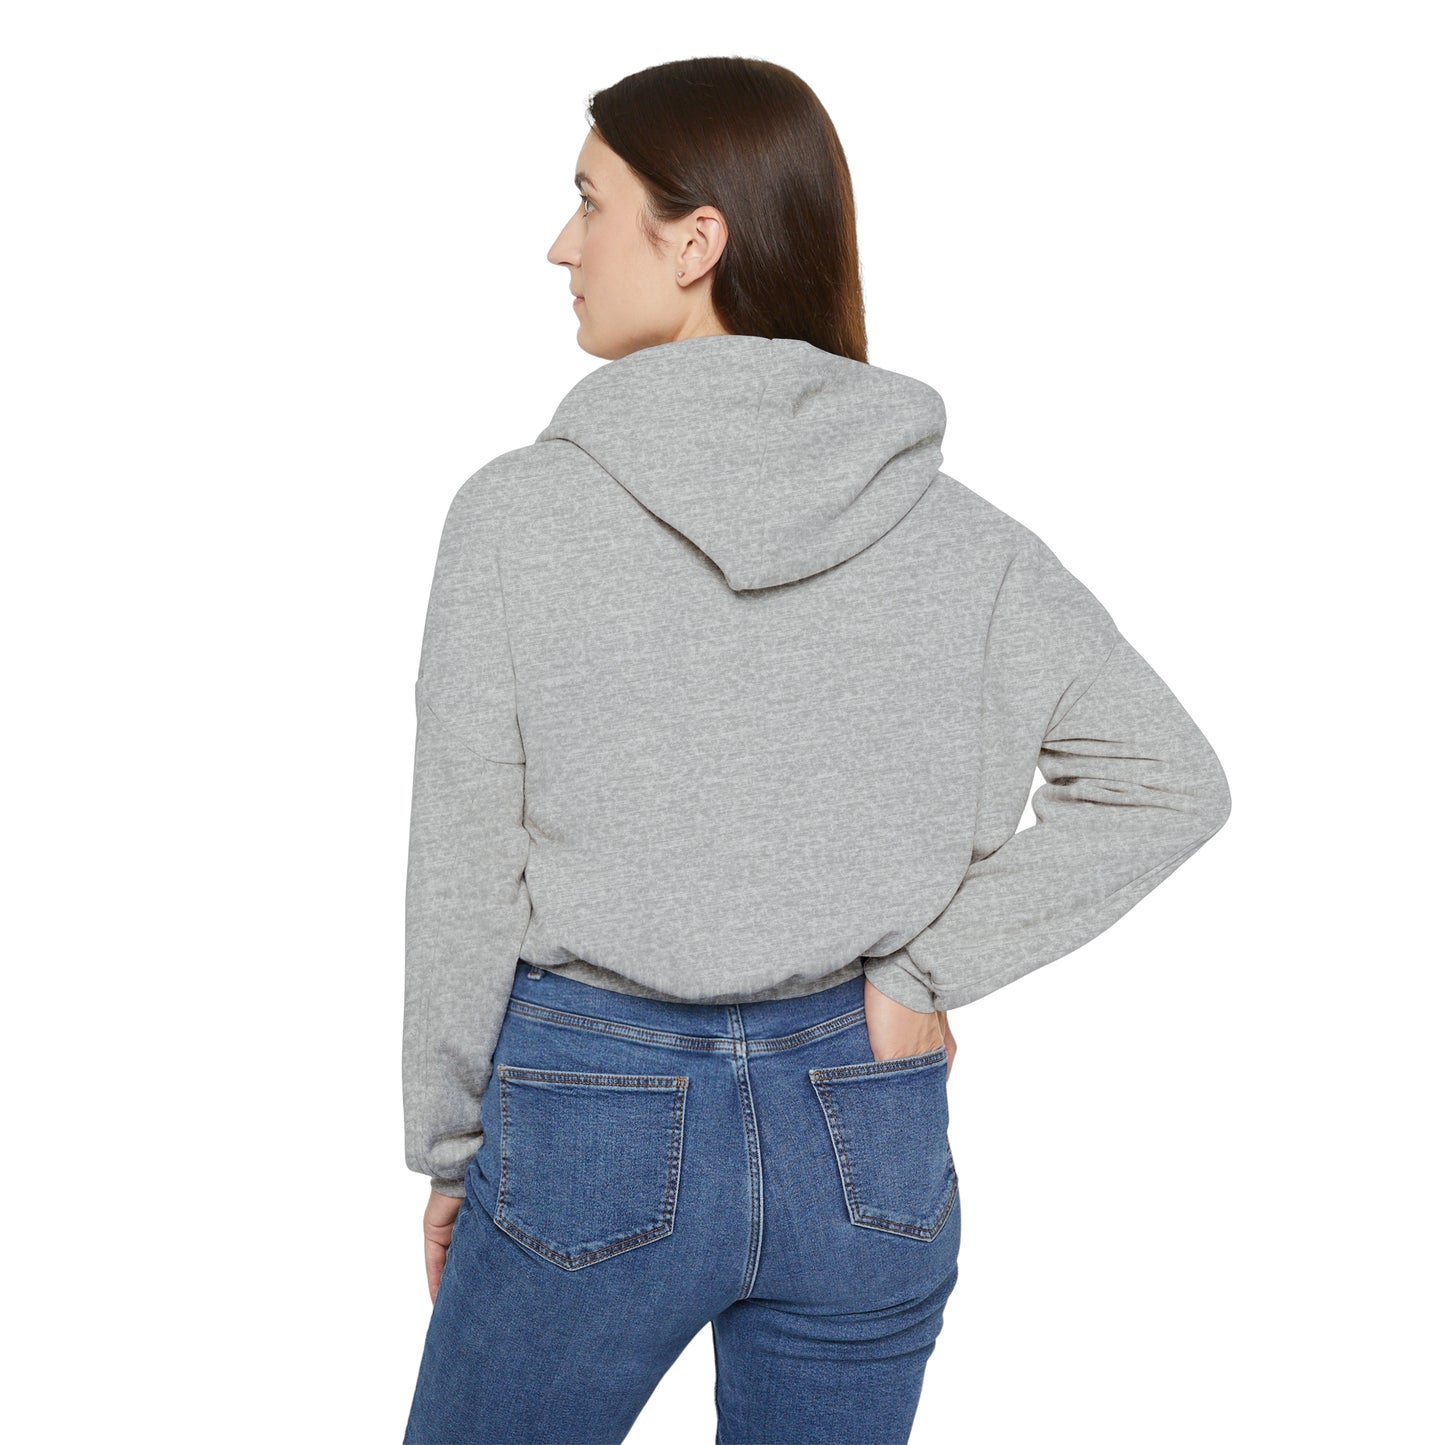 I'm Not Lazy.  I'm Just Very Relaxed.  Women's Cinched Bottom Hoodie